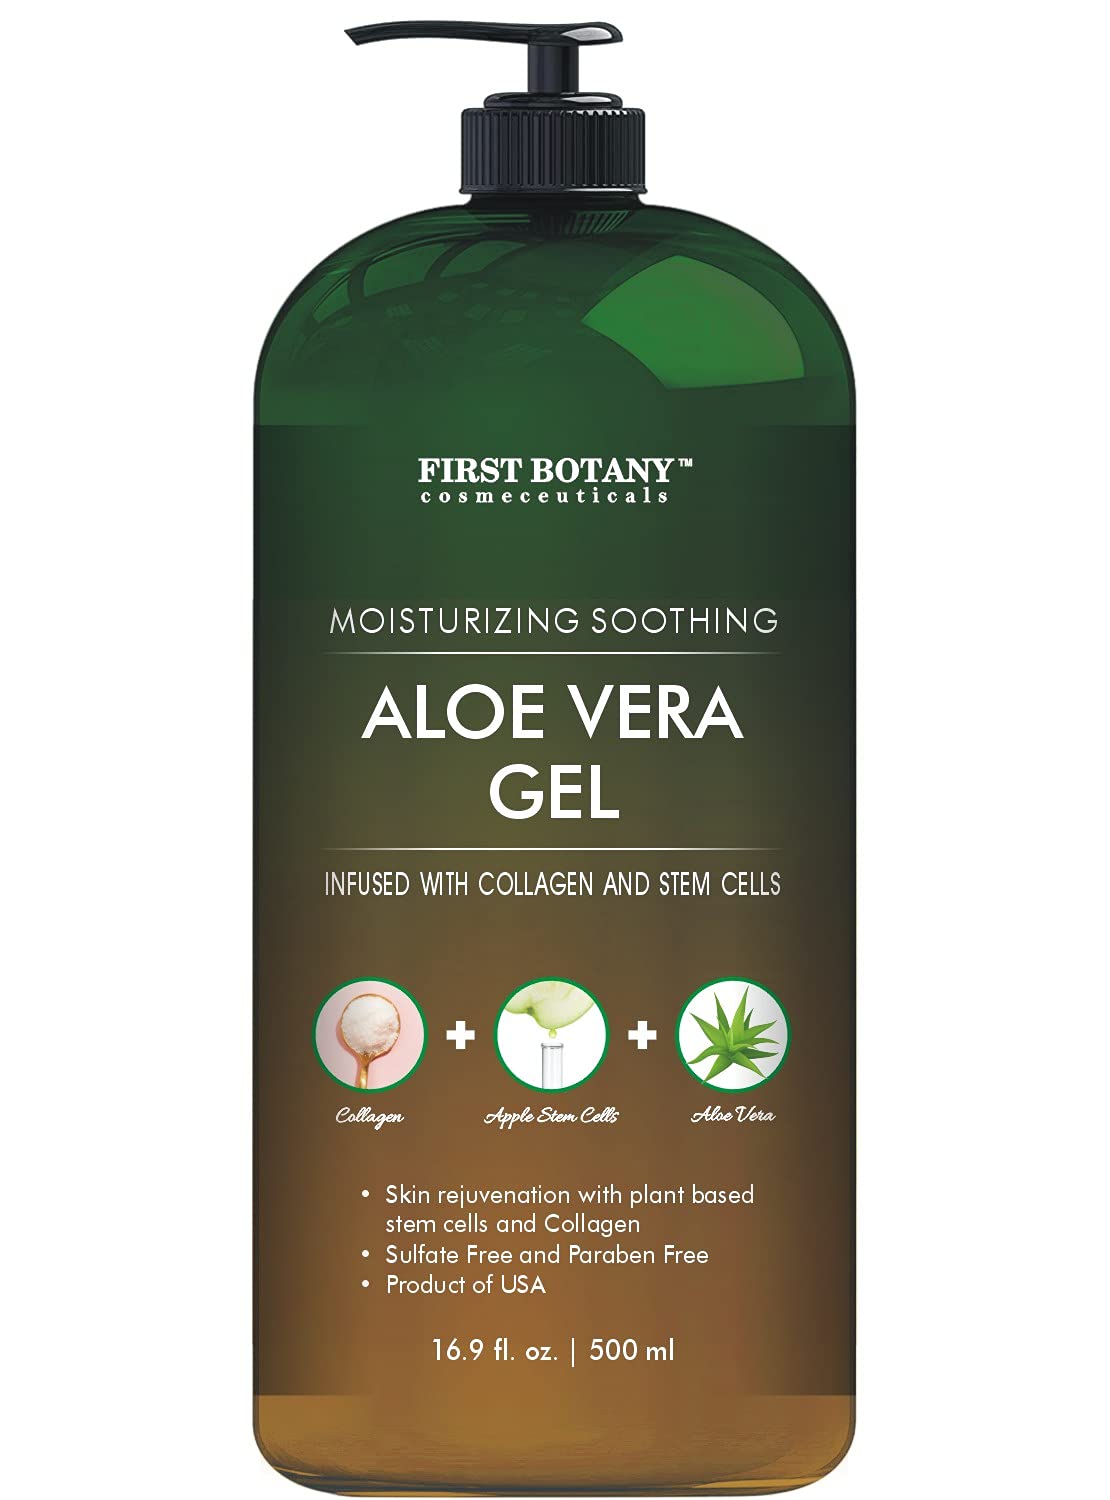 Pure Aloe vera gel - with 100% Fresh & Pure Aloe Infused with Stem Cells